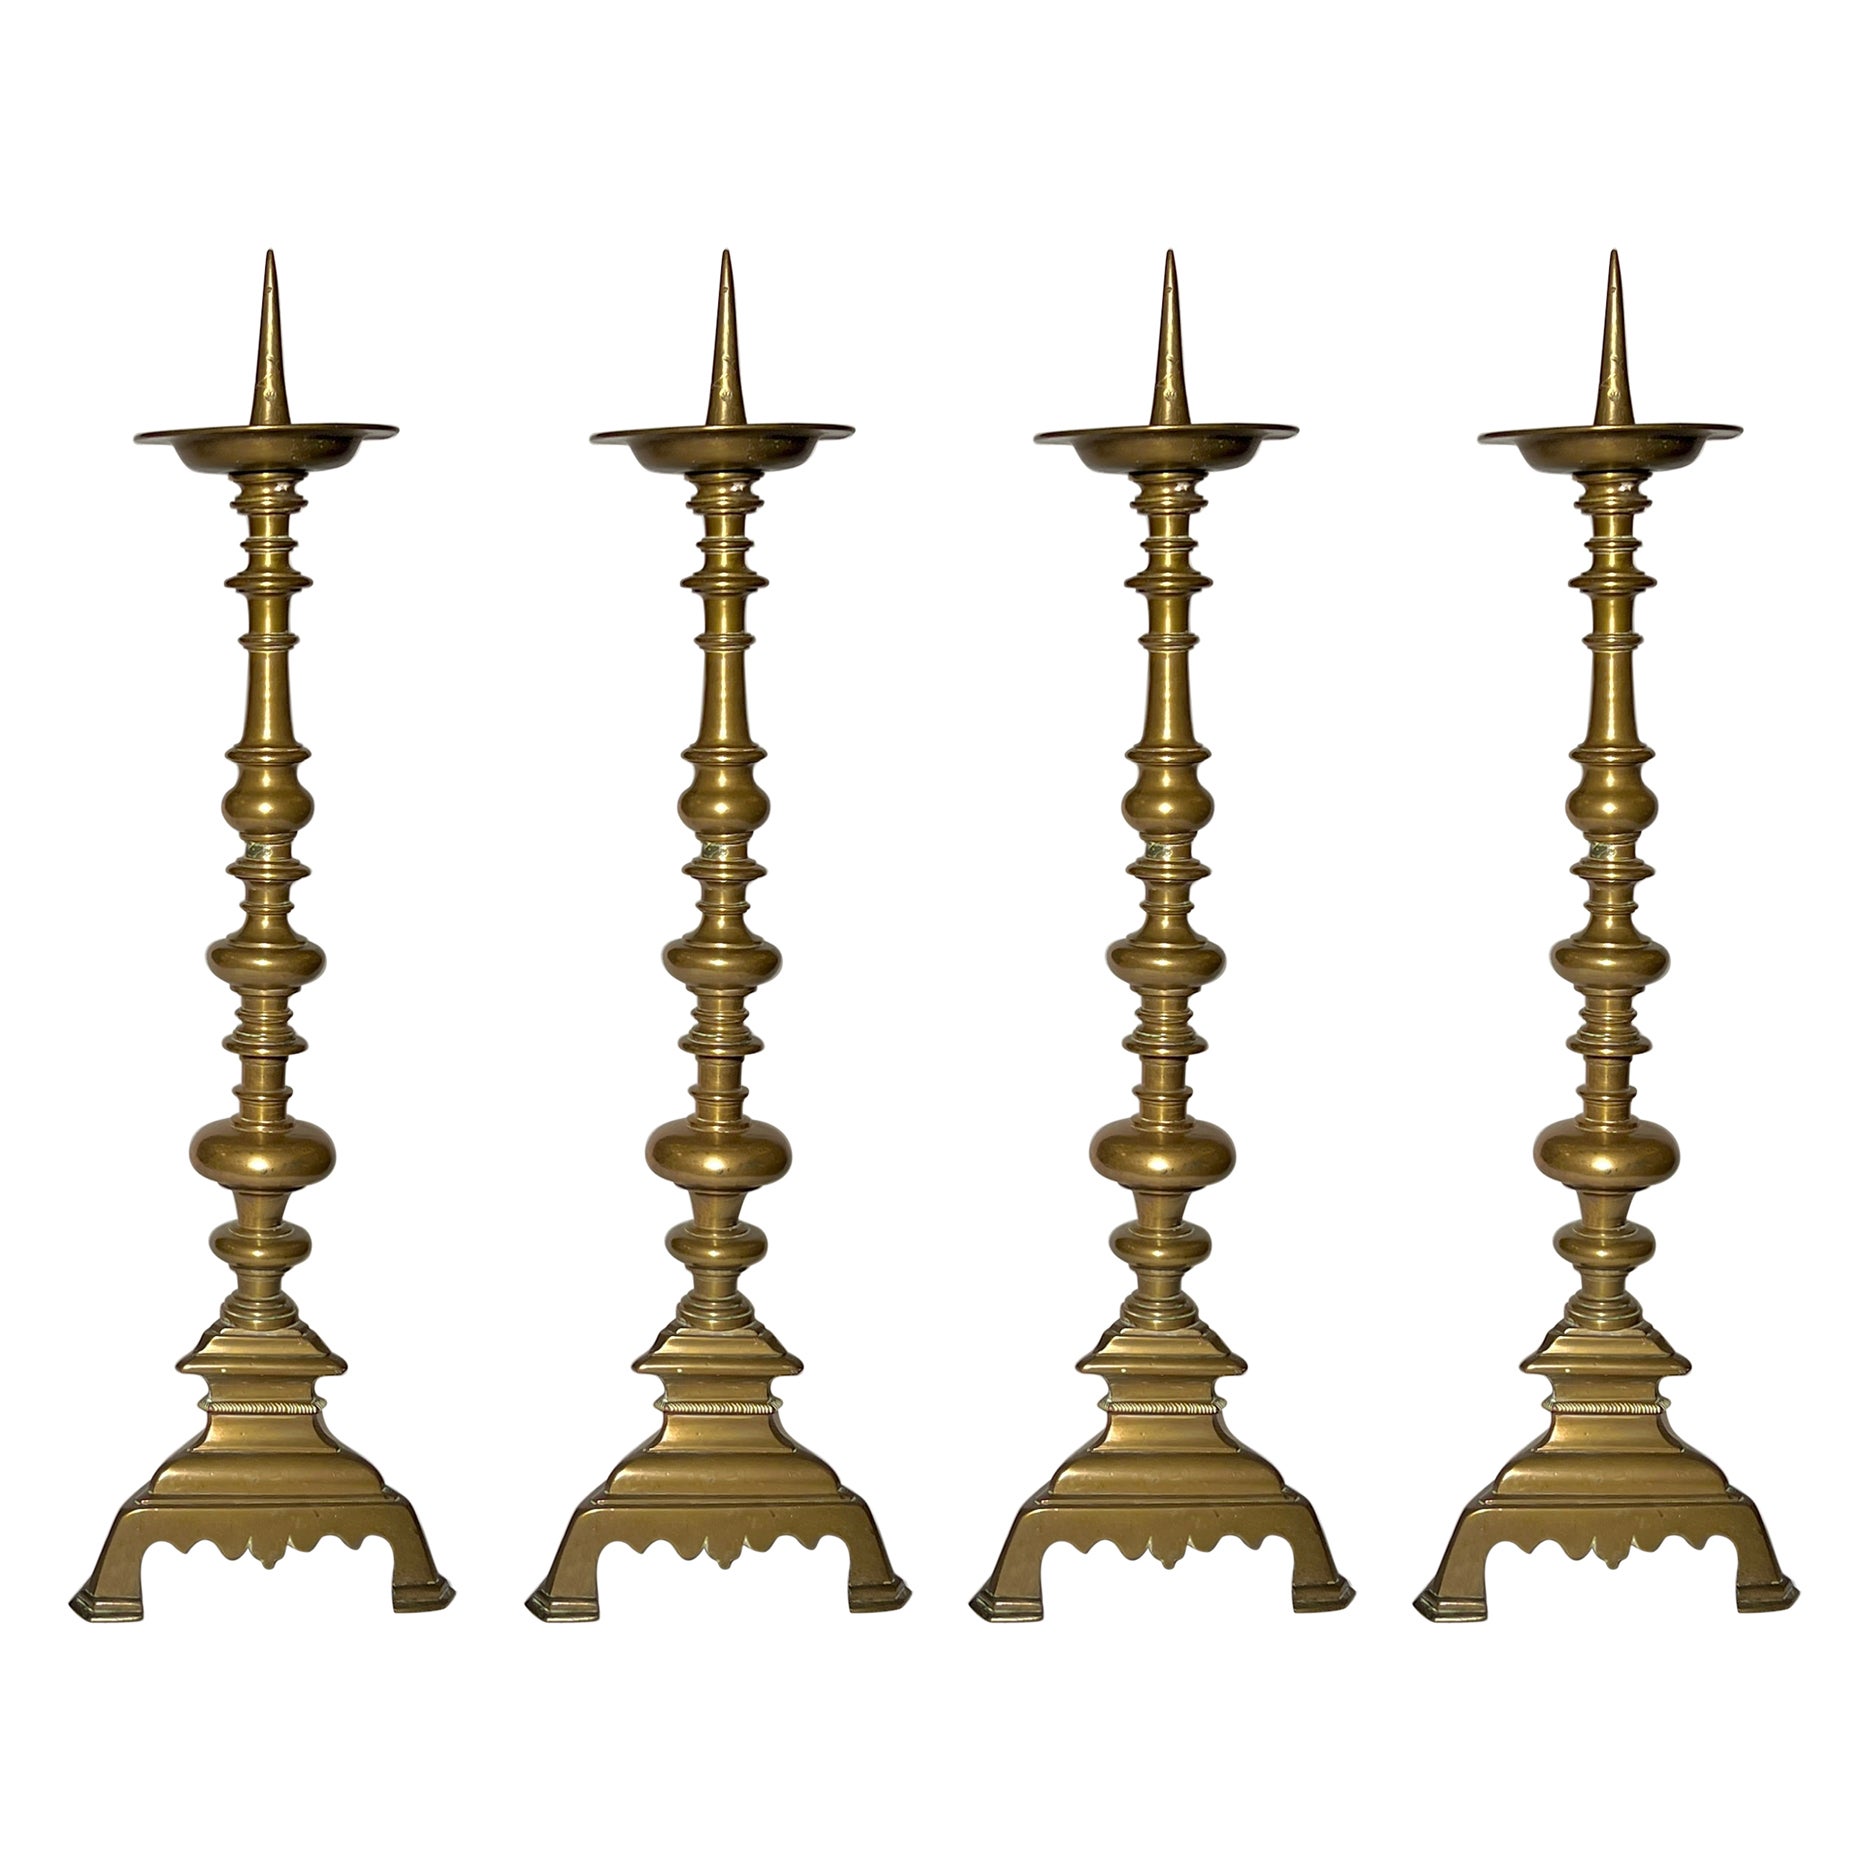 Set of Four Early 19th Century Brass Pricket Candlesticks, Circa 1810.